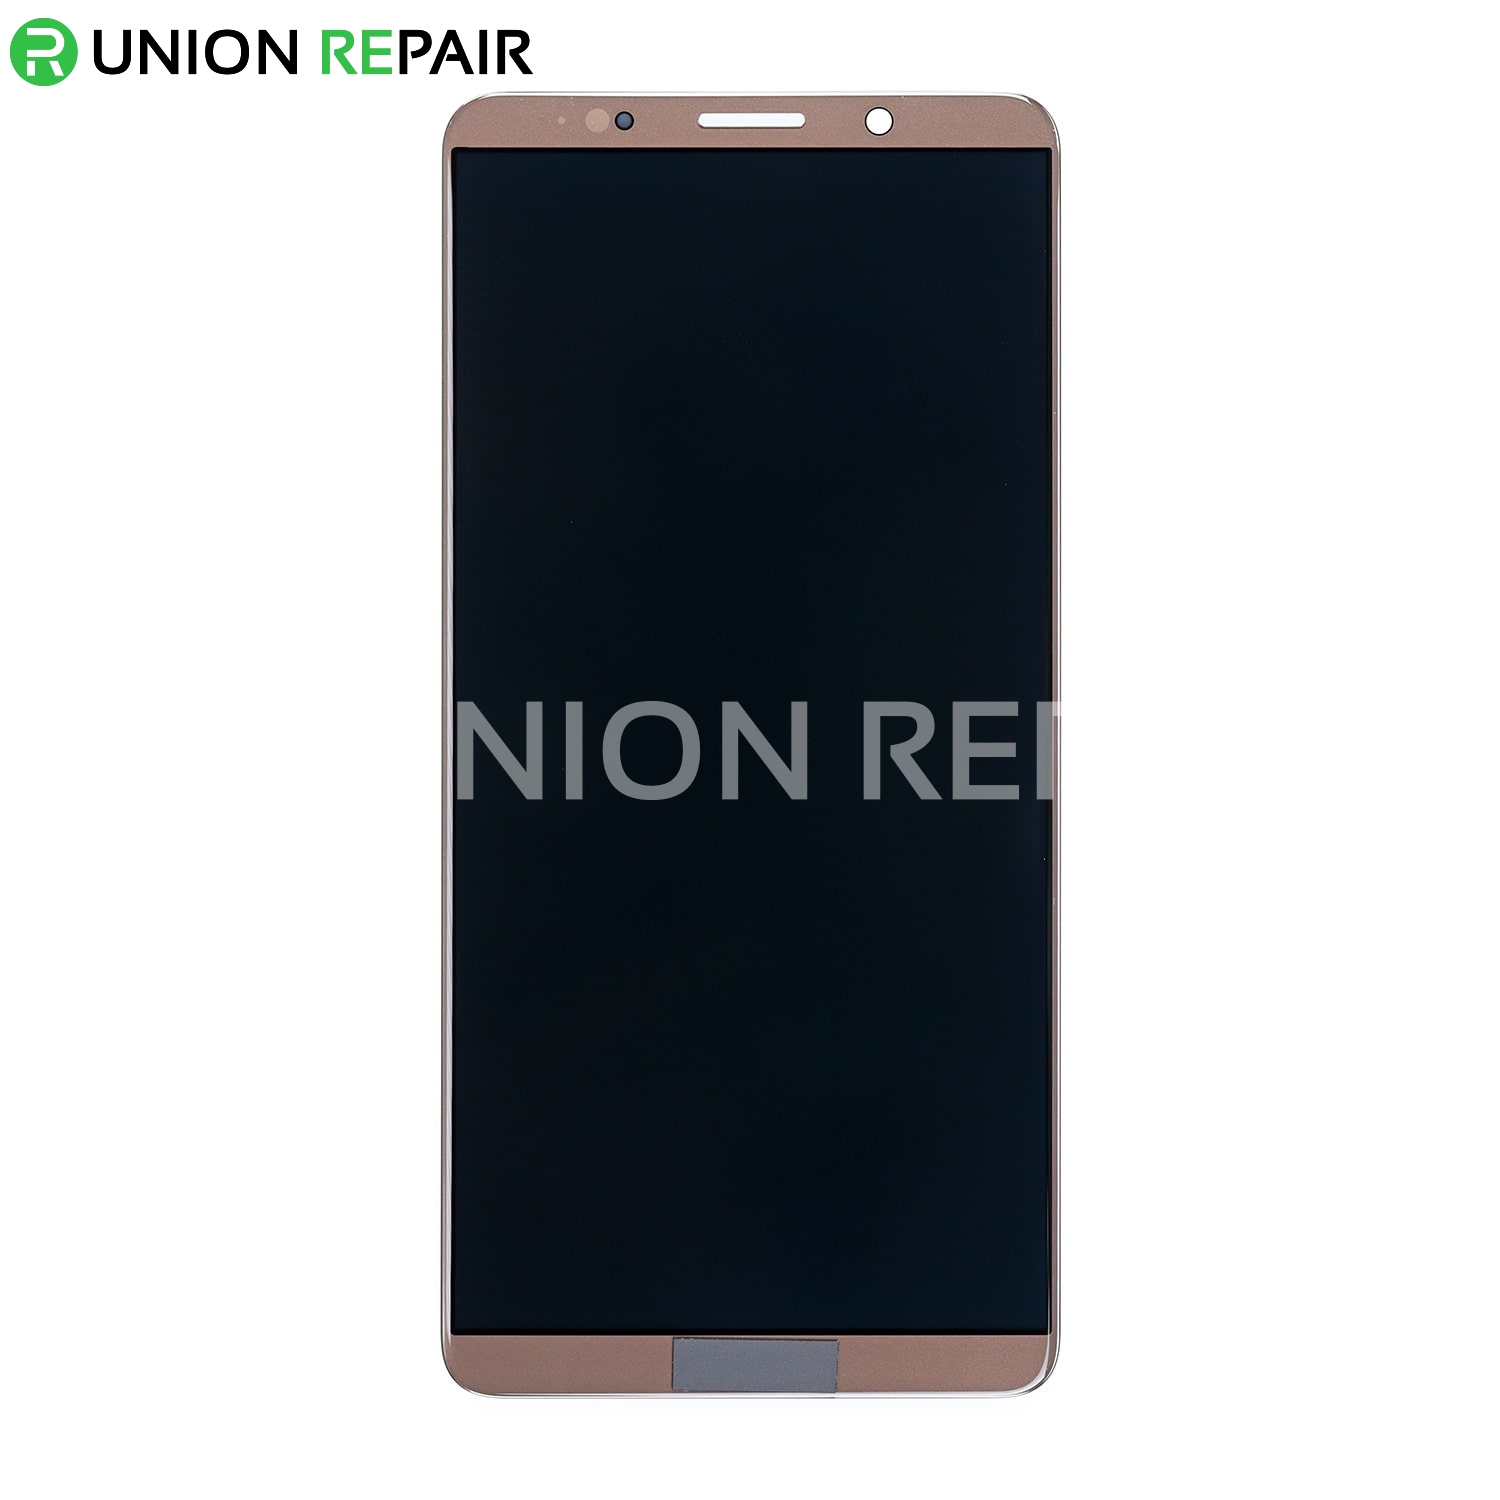 Replacement for Huawei Mate 10 Pro LCD Screen Digitizer Assembly - Mocha Brown